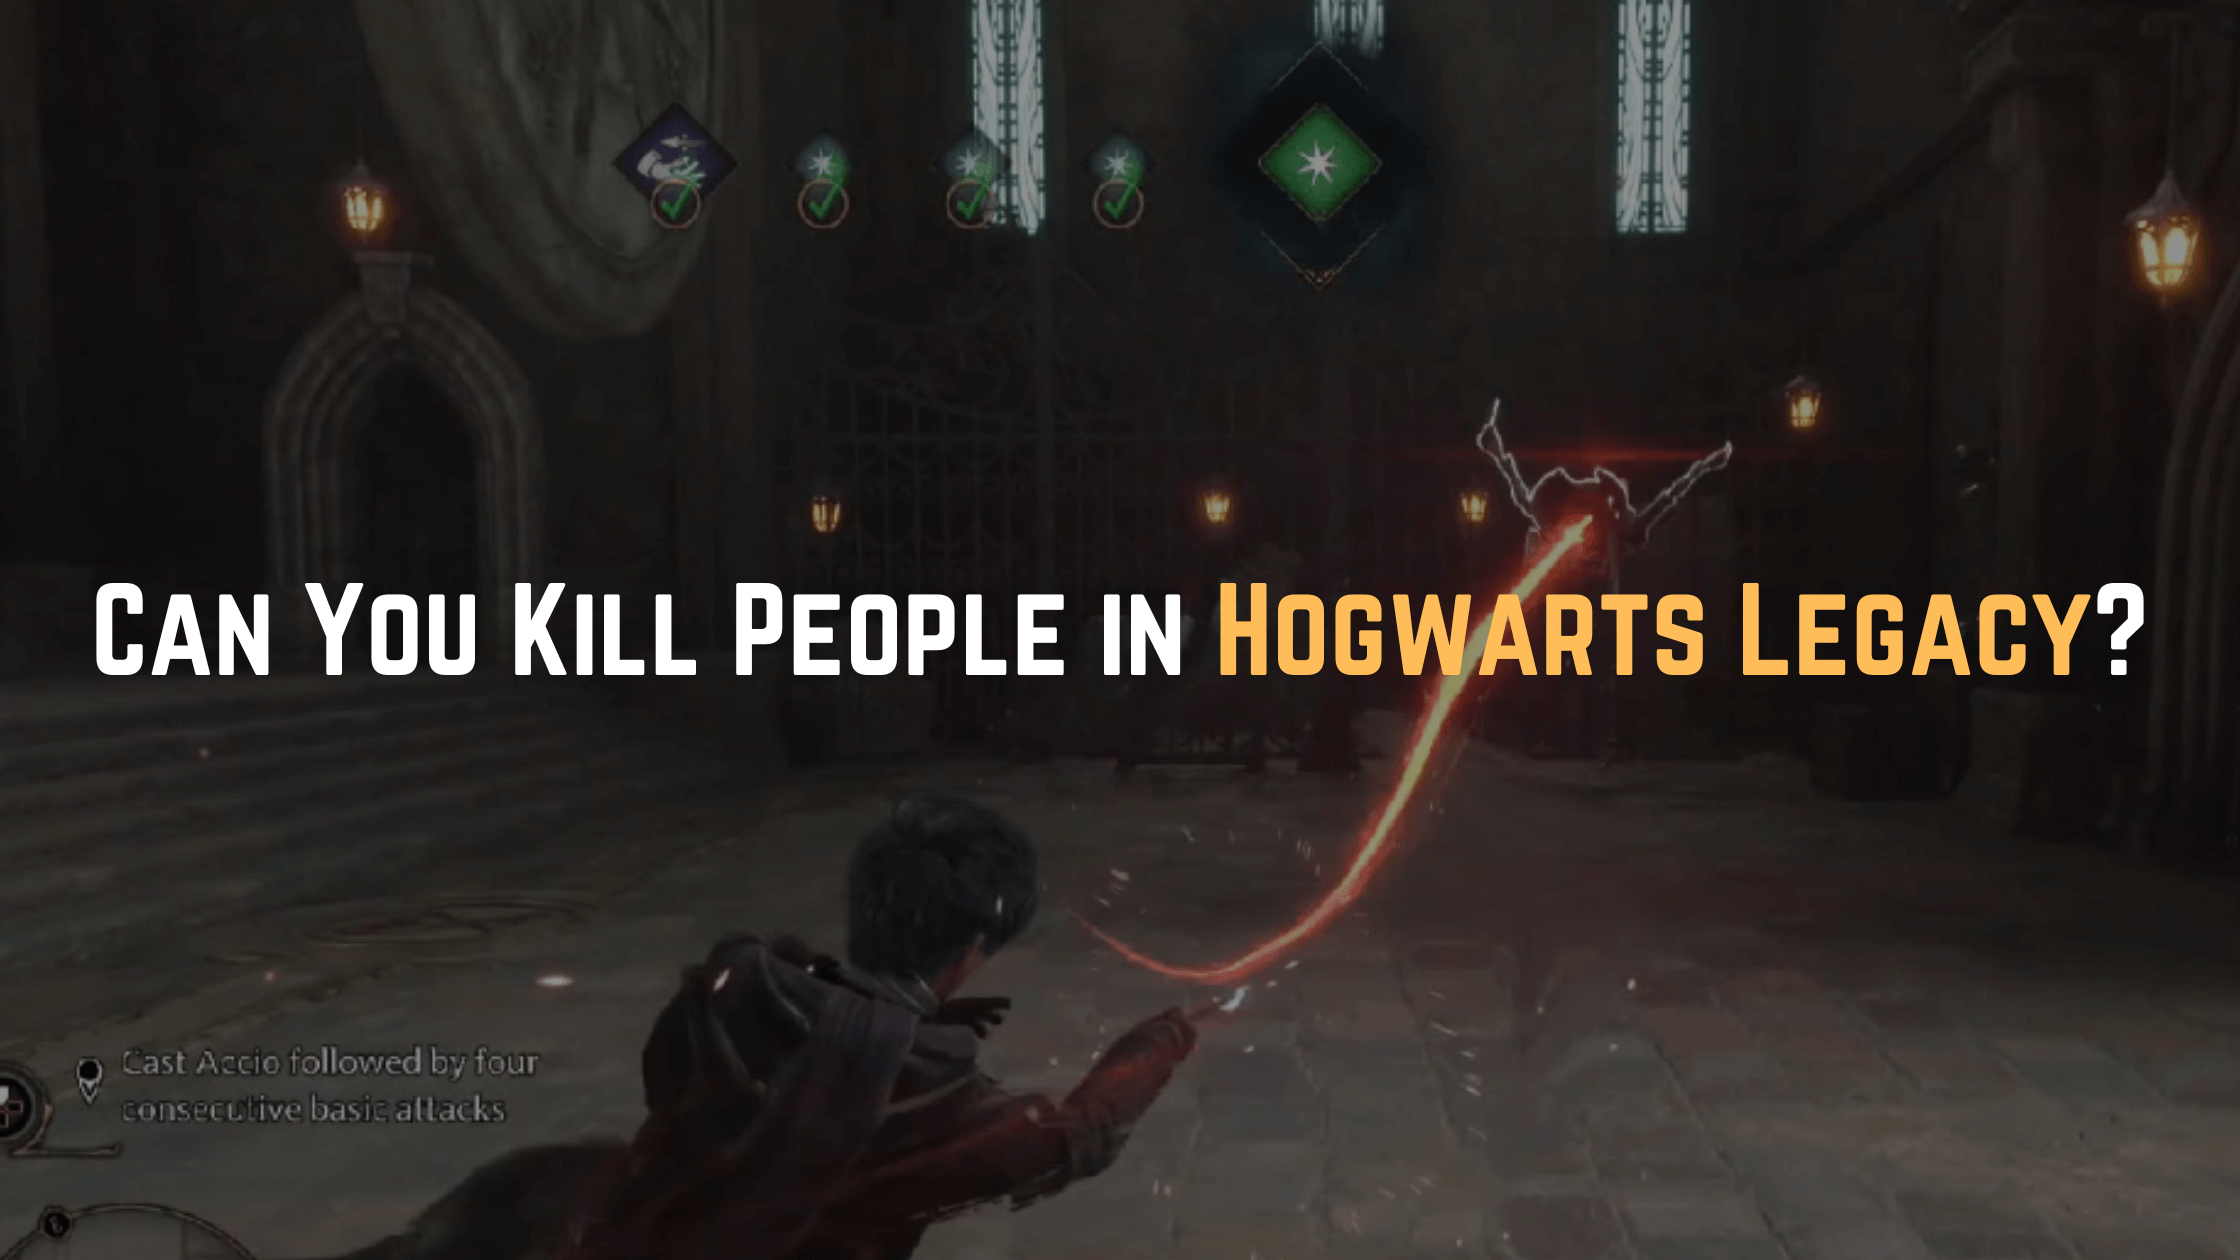 Can You Kill People in Hogwarts Legacy